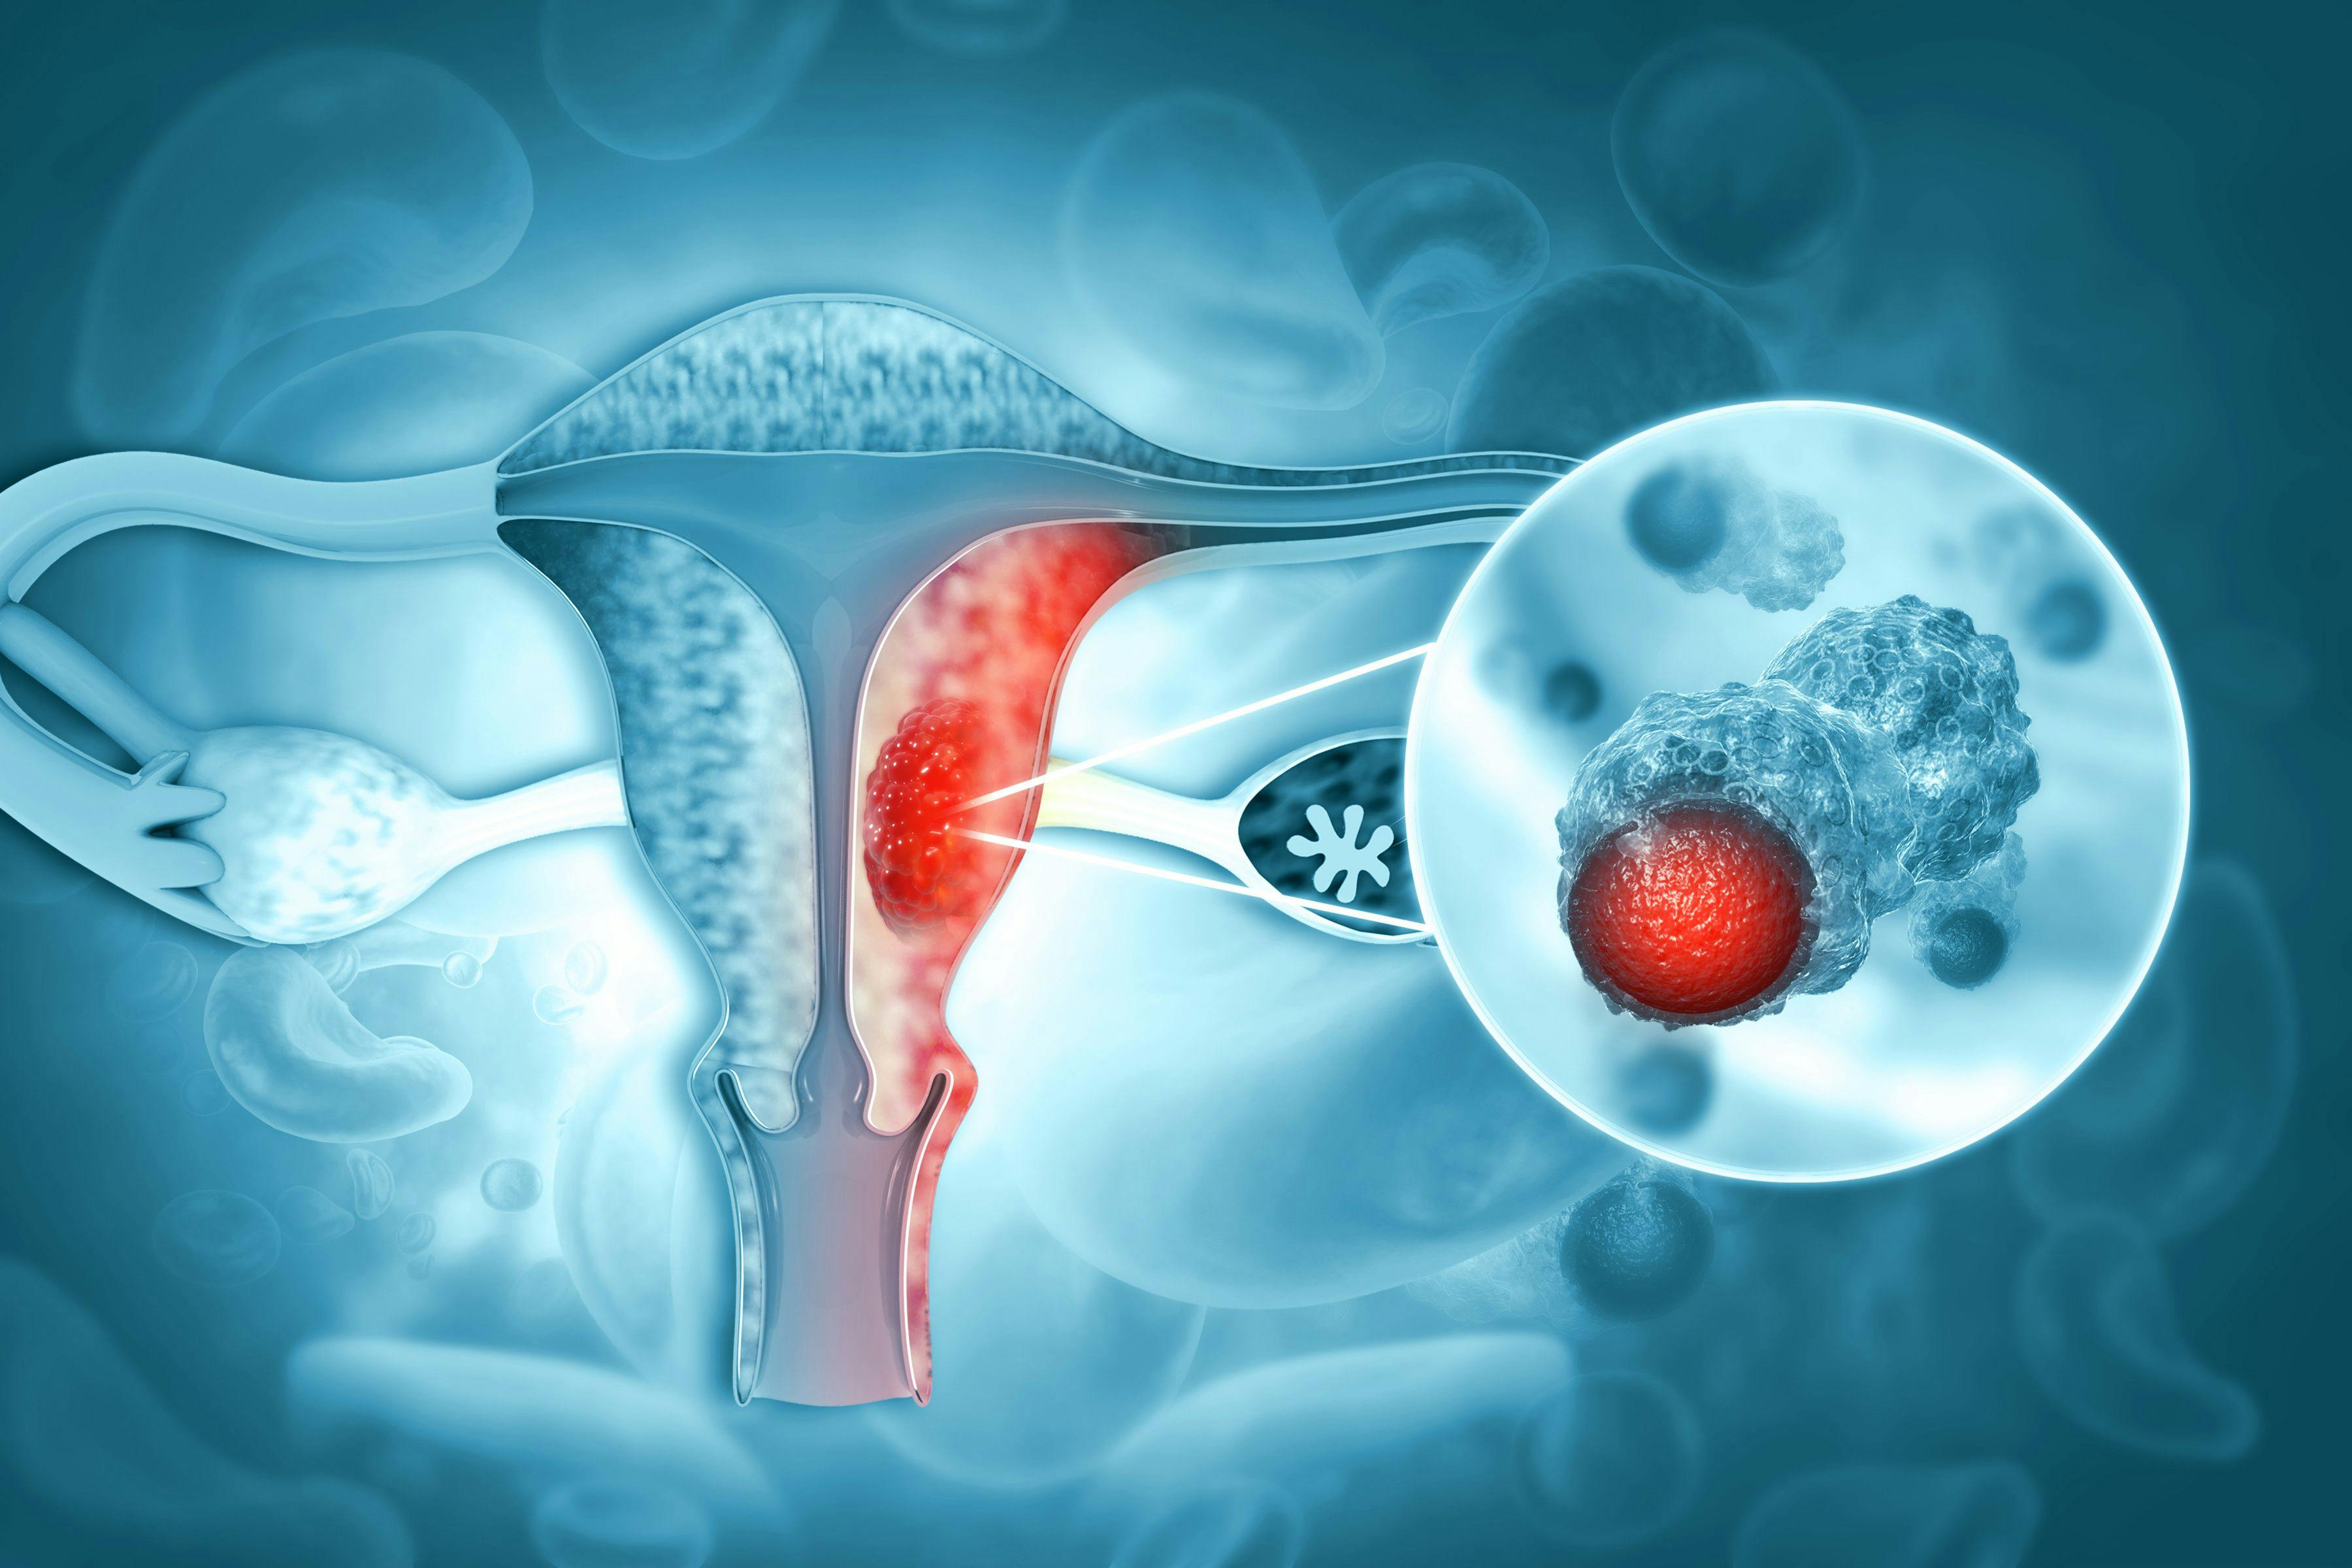 Female reproductive system diseases.uterus cancer and endometrial malignant tumor as a uterine medical concept.3d illustration | Image credit: © Crystal light © stock.adobe.com